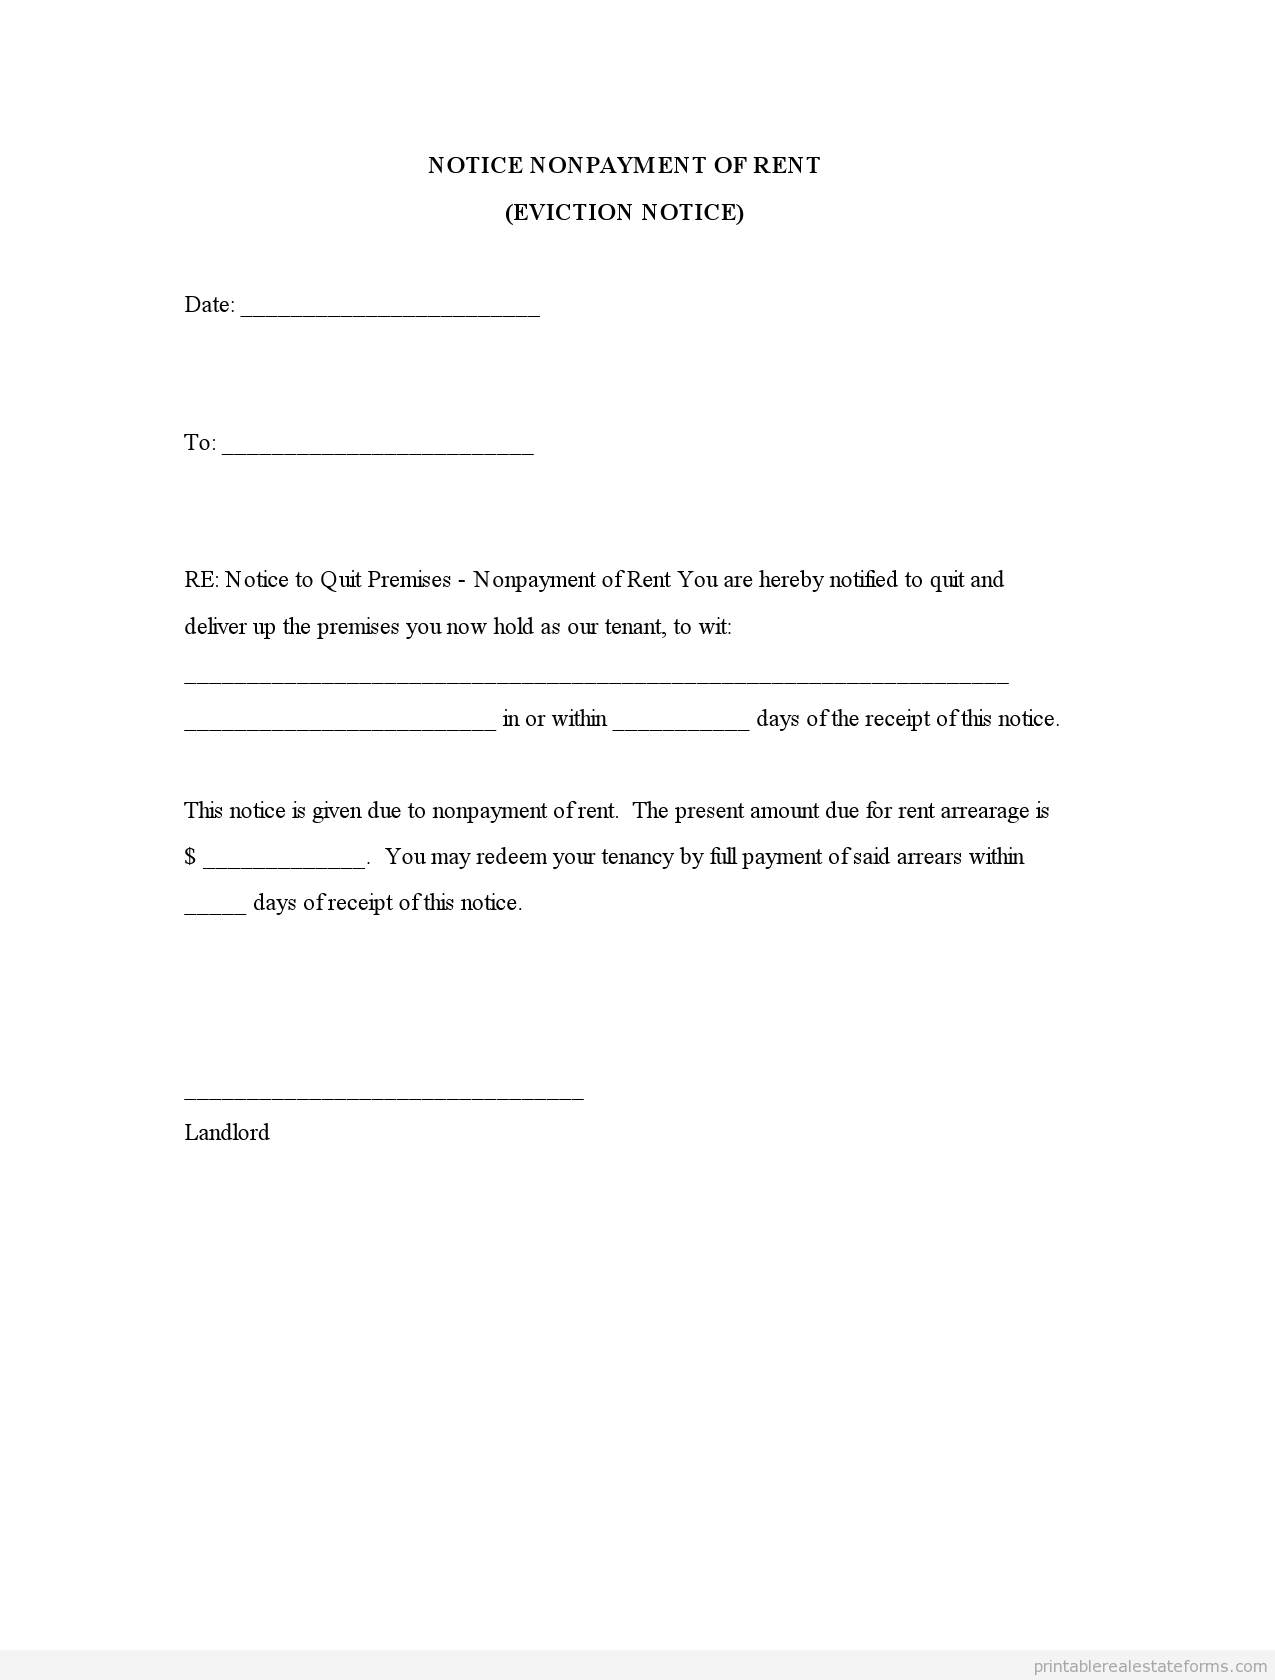 Lodger Eviction Letter Template - 20 Best Notice to Quit Letter Template Uk